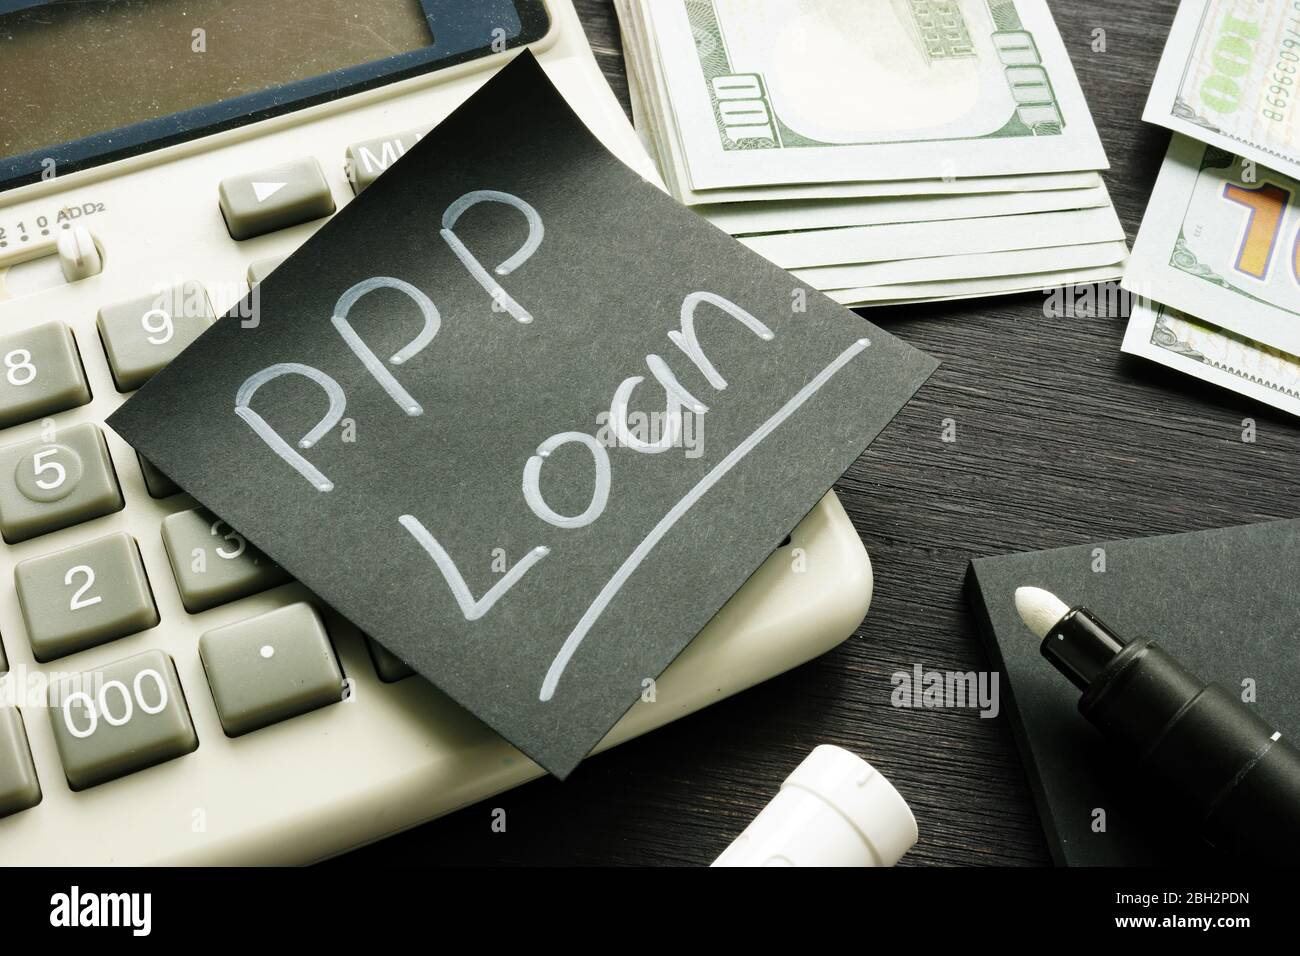 Memo sign PPP Loan Paycheck Protection Program on the black piece of paper. Stock Photo